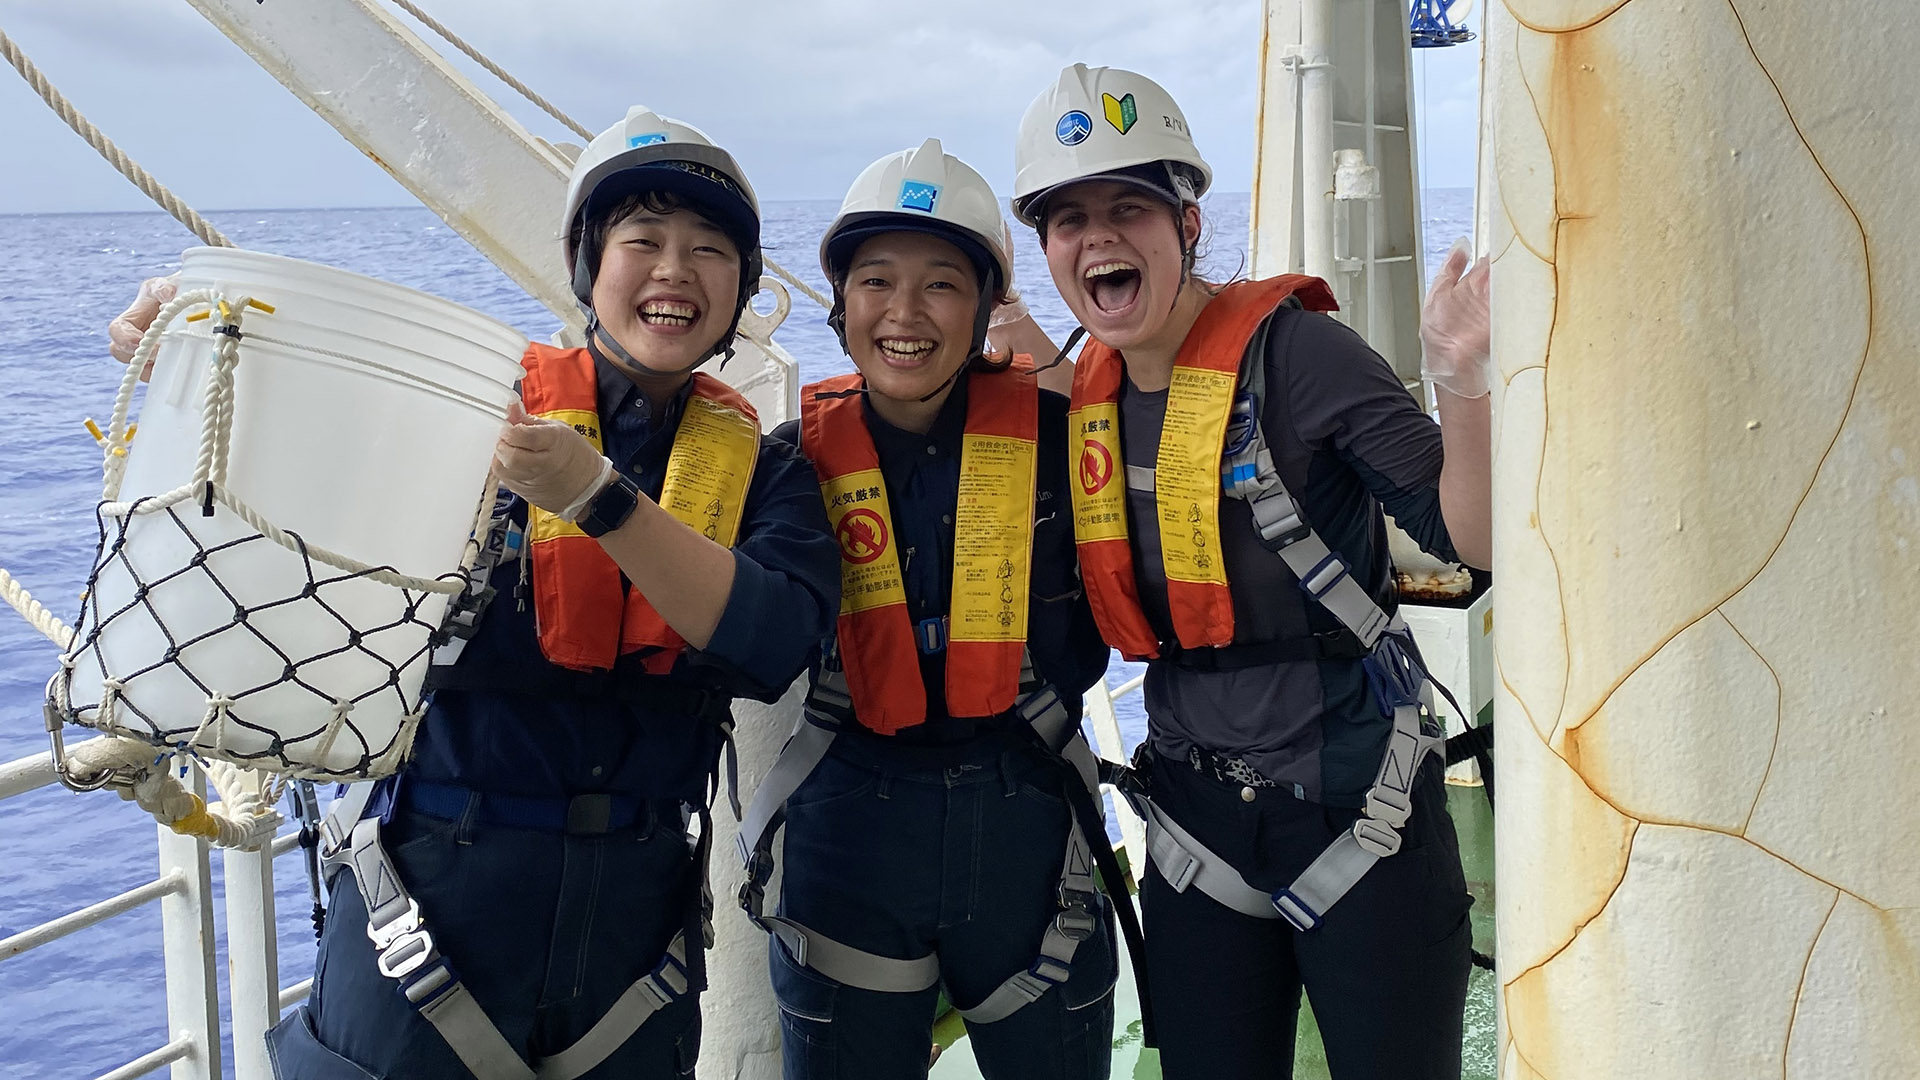 Bucket sampling for surface seawater. Mariko, Aya and I were the three graduate students of the 3am-3pm sampling team. It was so fun trading language and cultural insights with them and sharing early morning laughs! Photo: Akiko Makabe